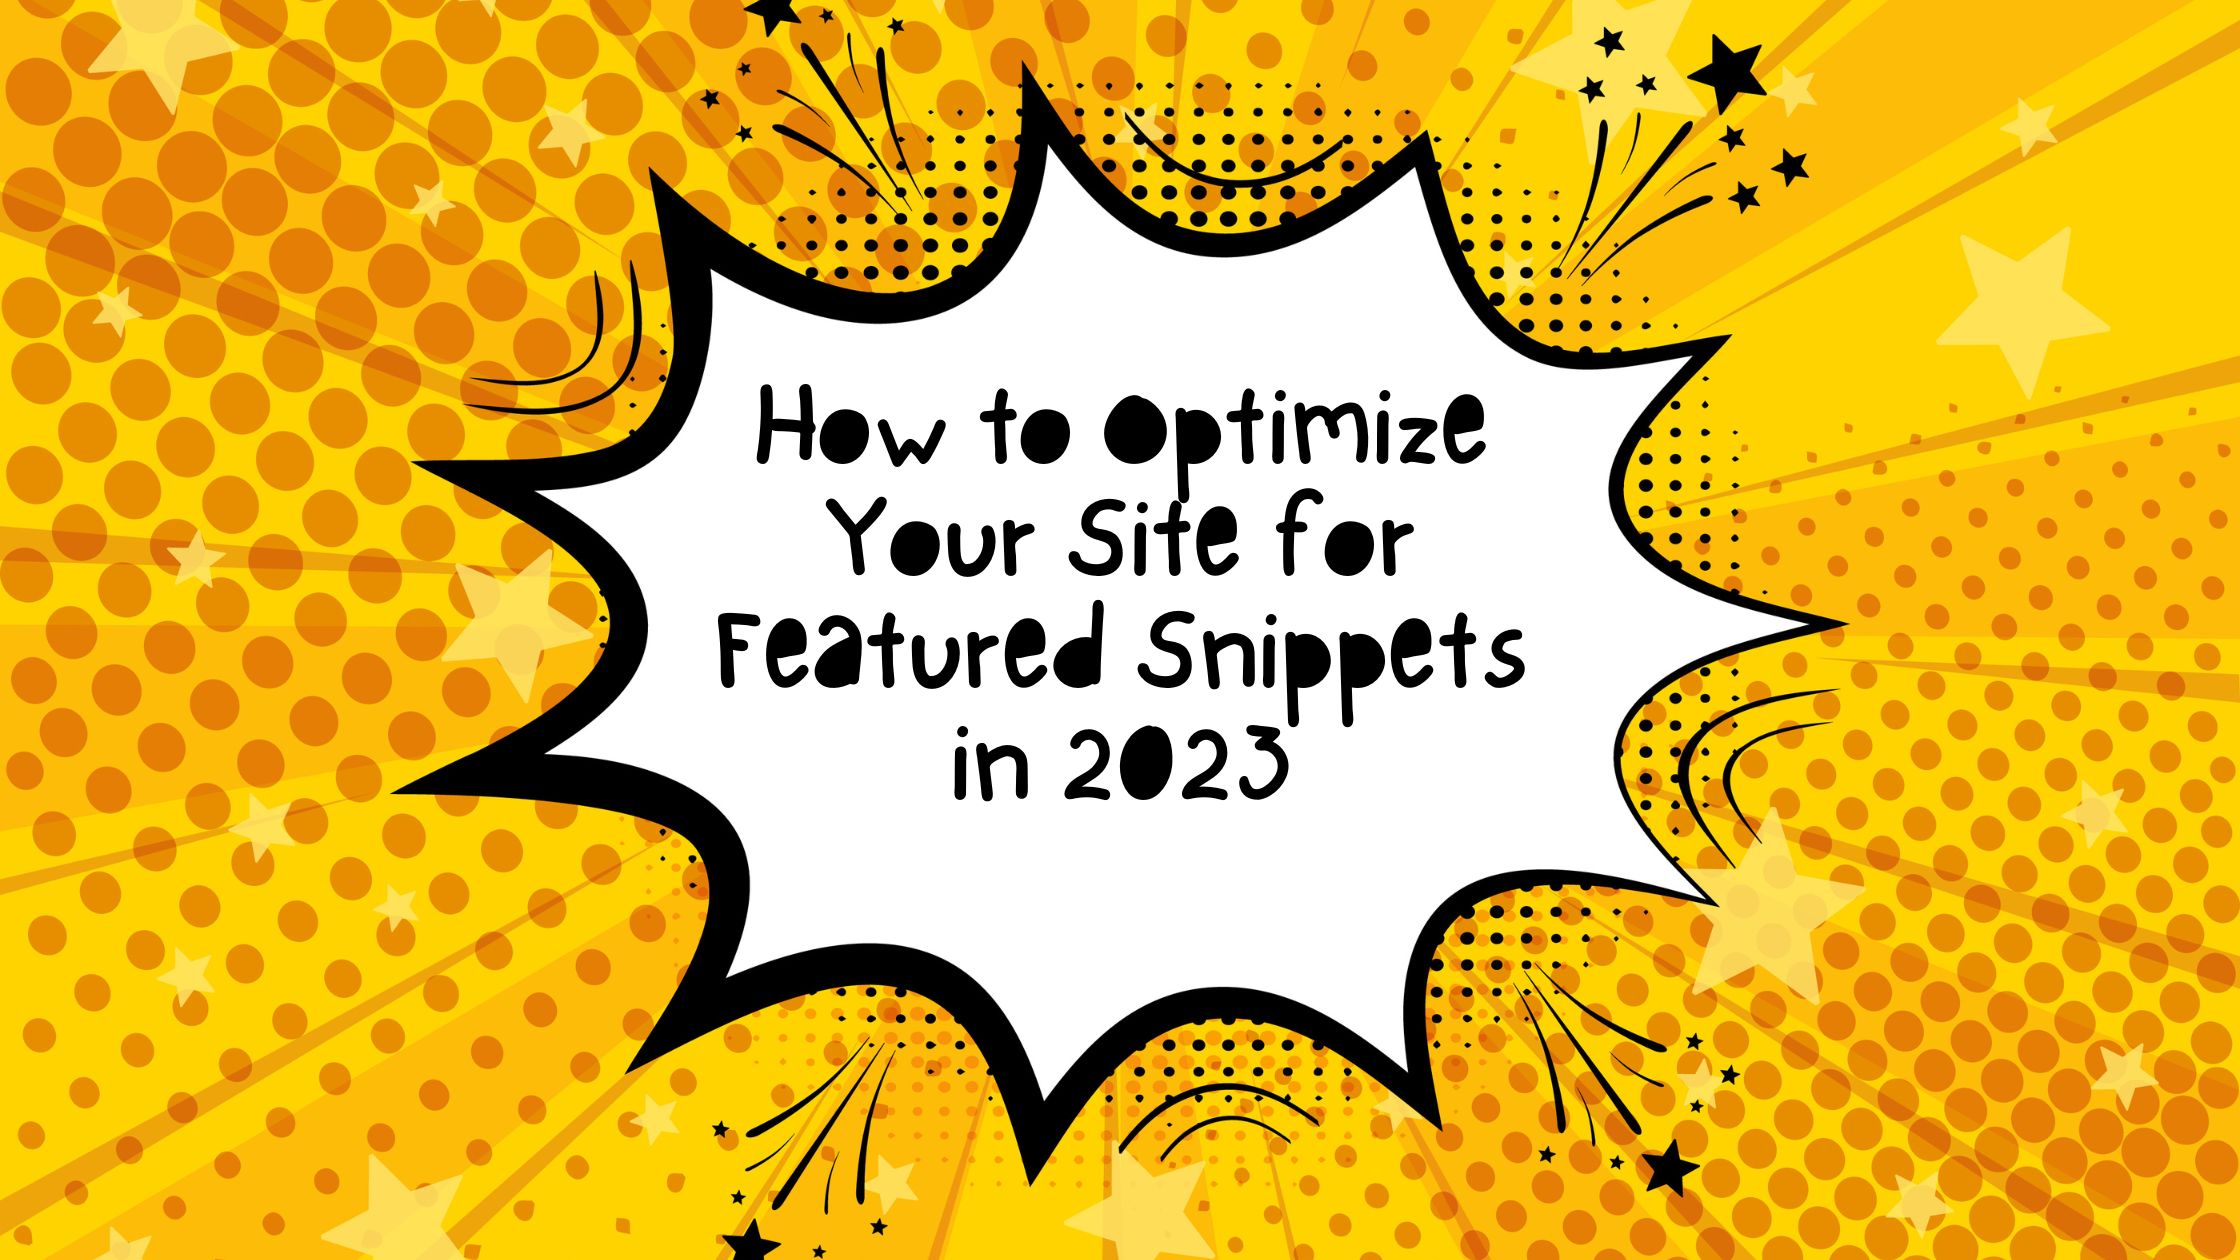 How to Optimize Your Site for Featured Snippets in 2023